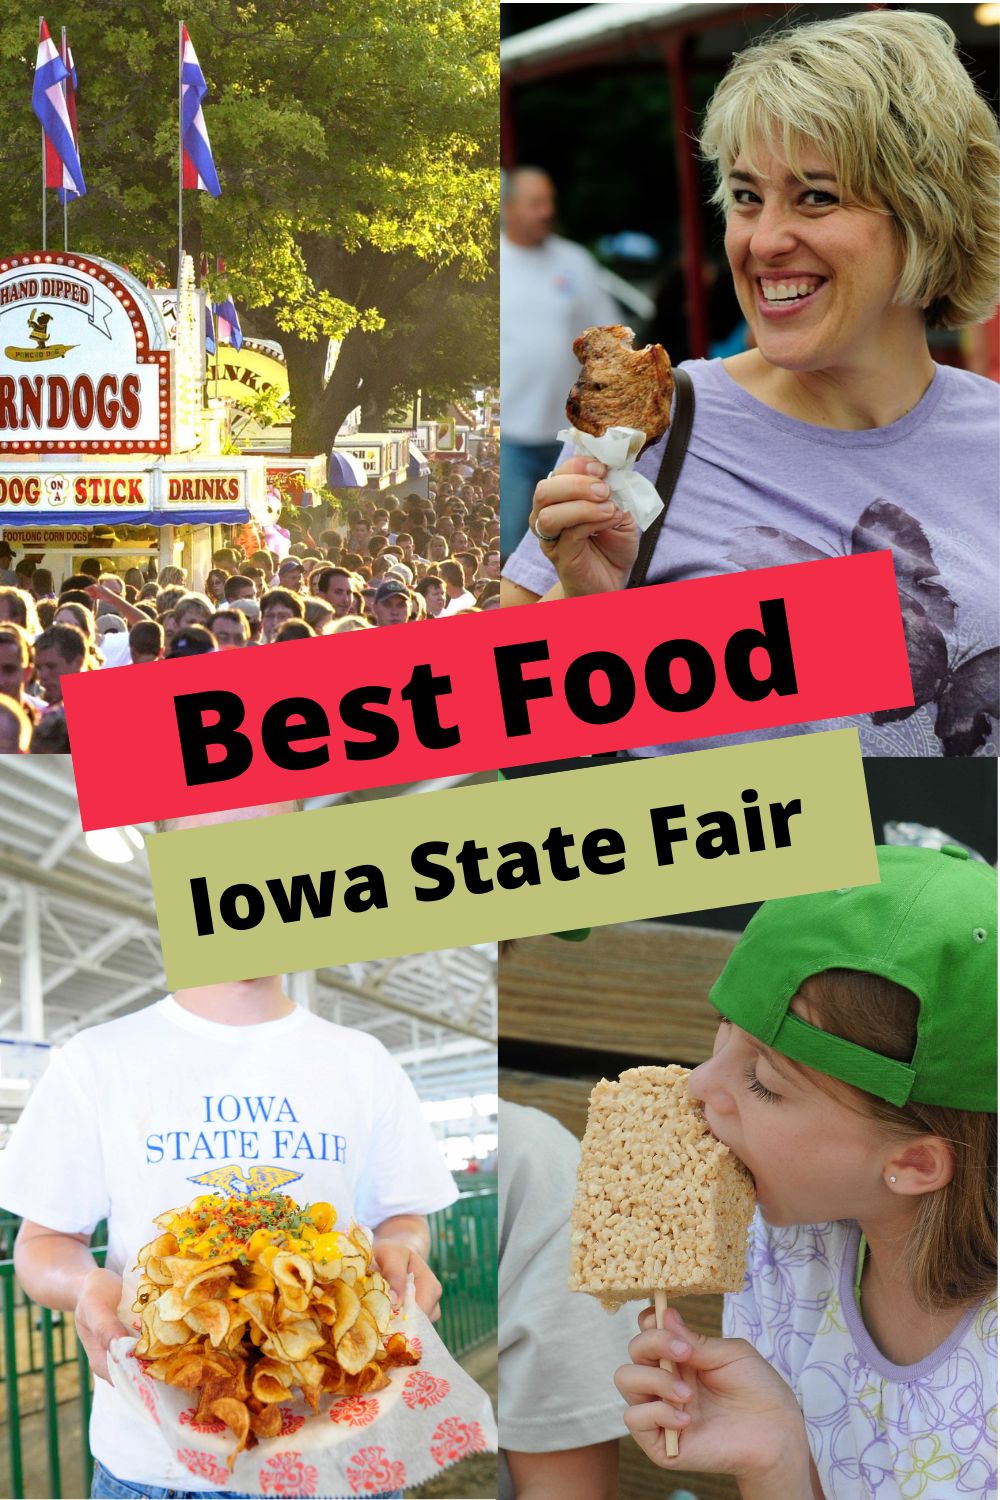 10 Iowa State Fair Food You Have To Try - Let's Go Iowa